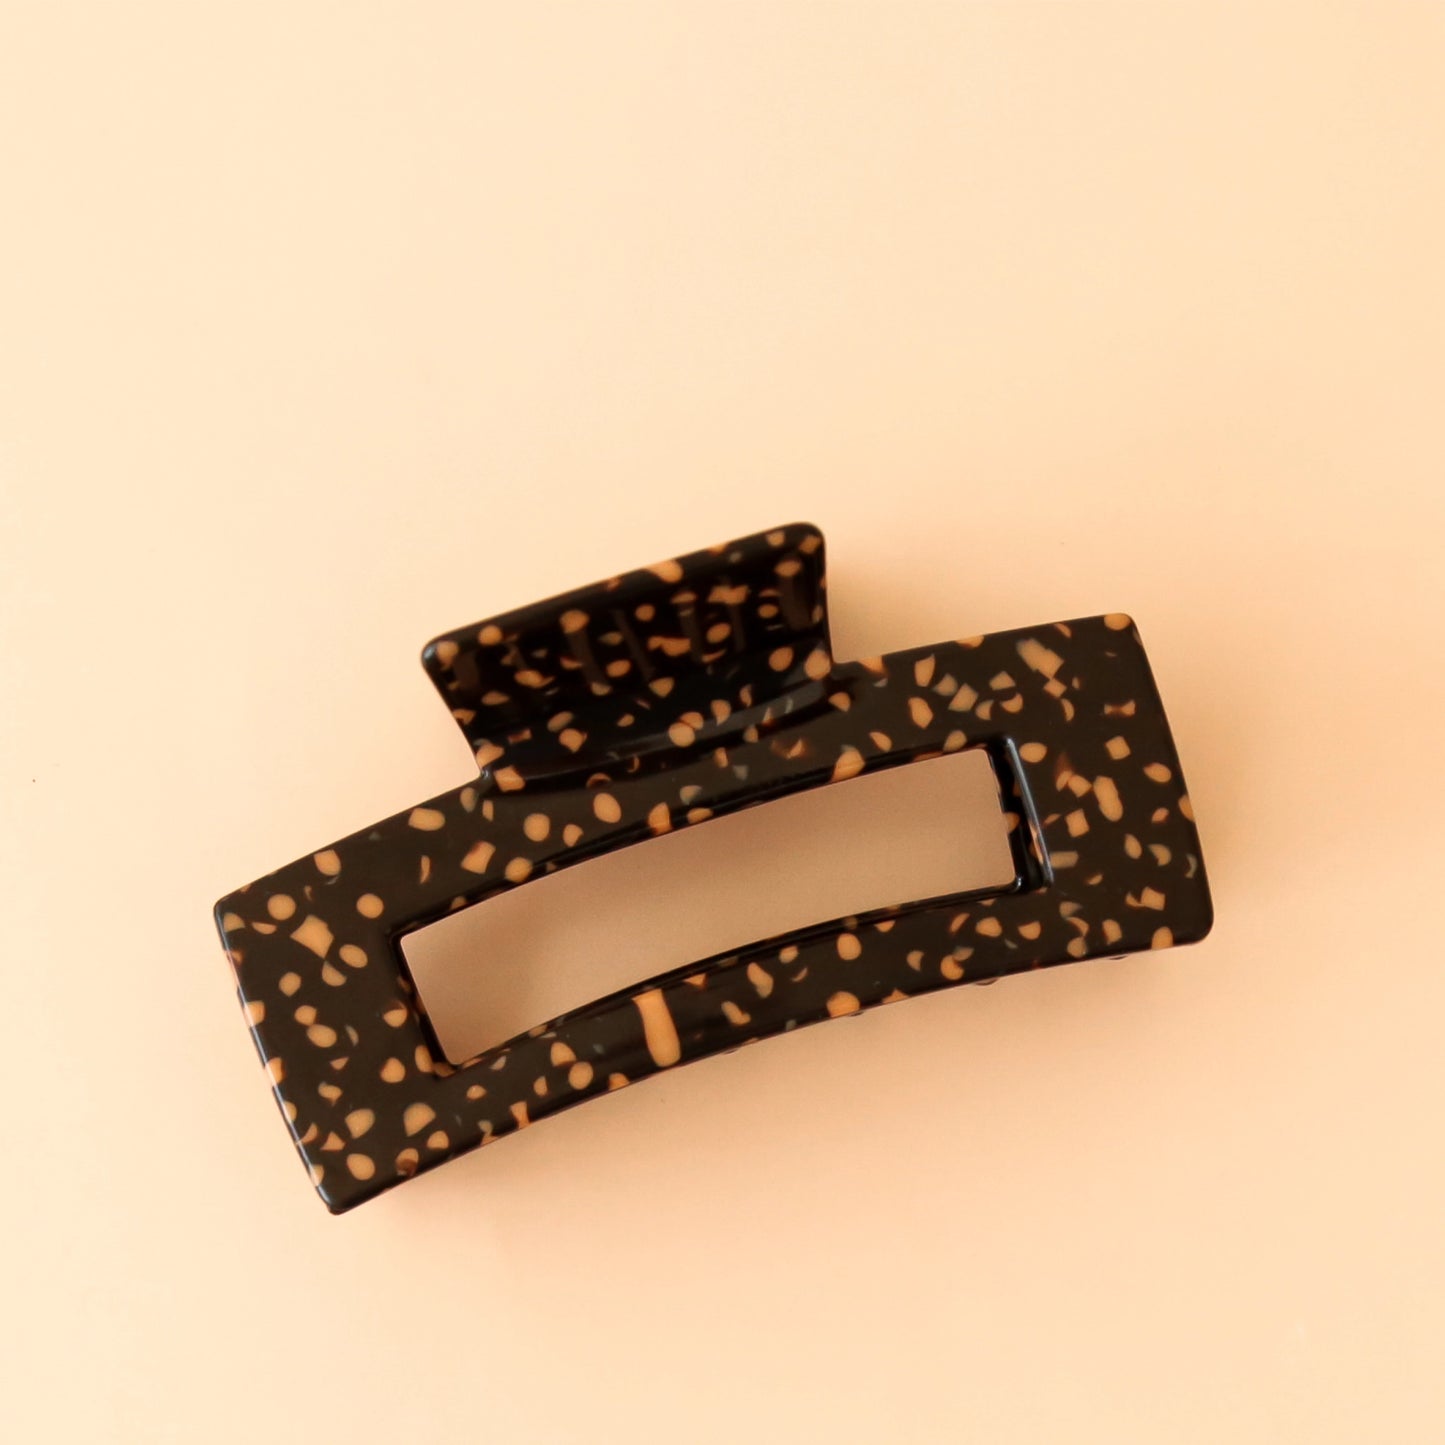 On a peach backgrounds a brown and orange spotted rectangular claw clip.